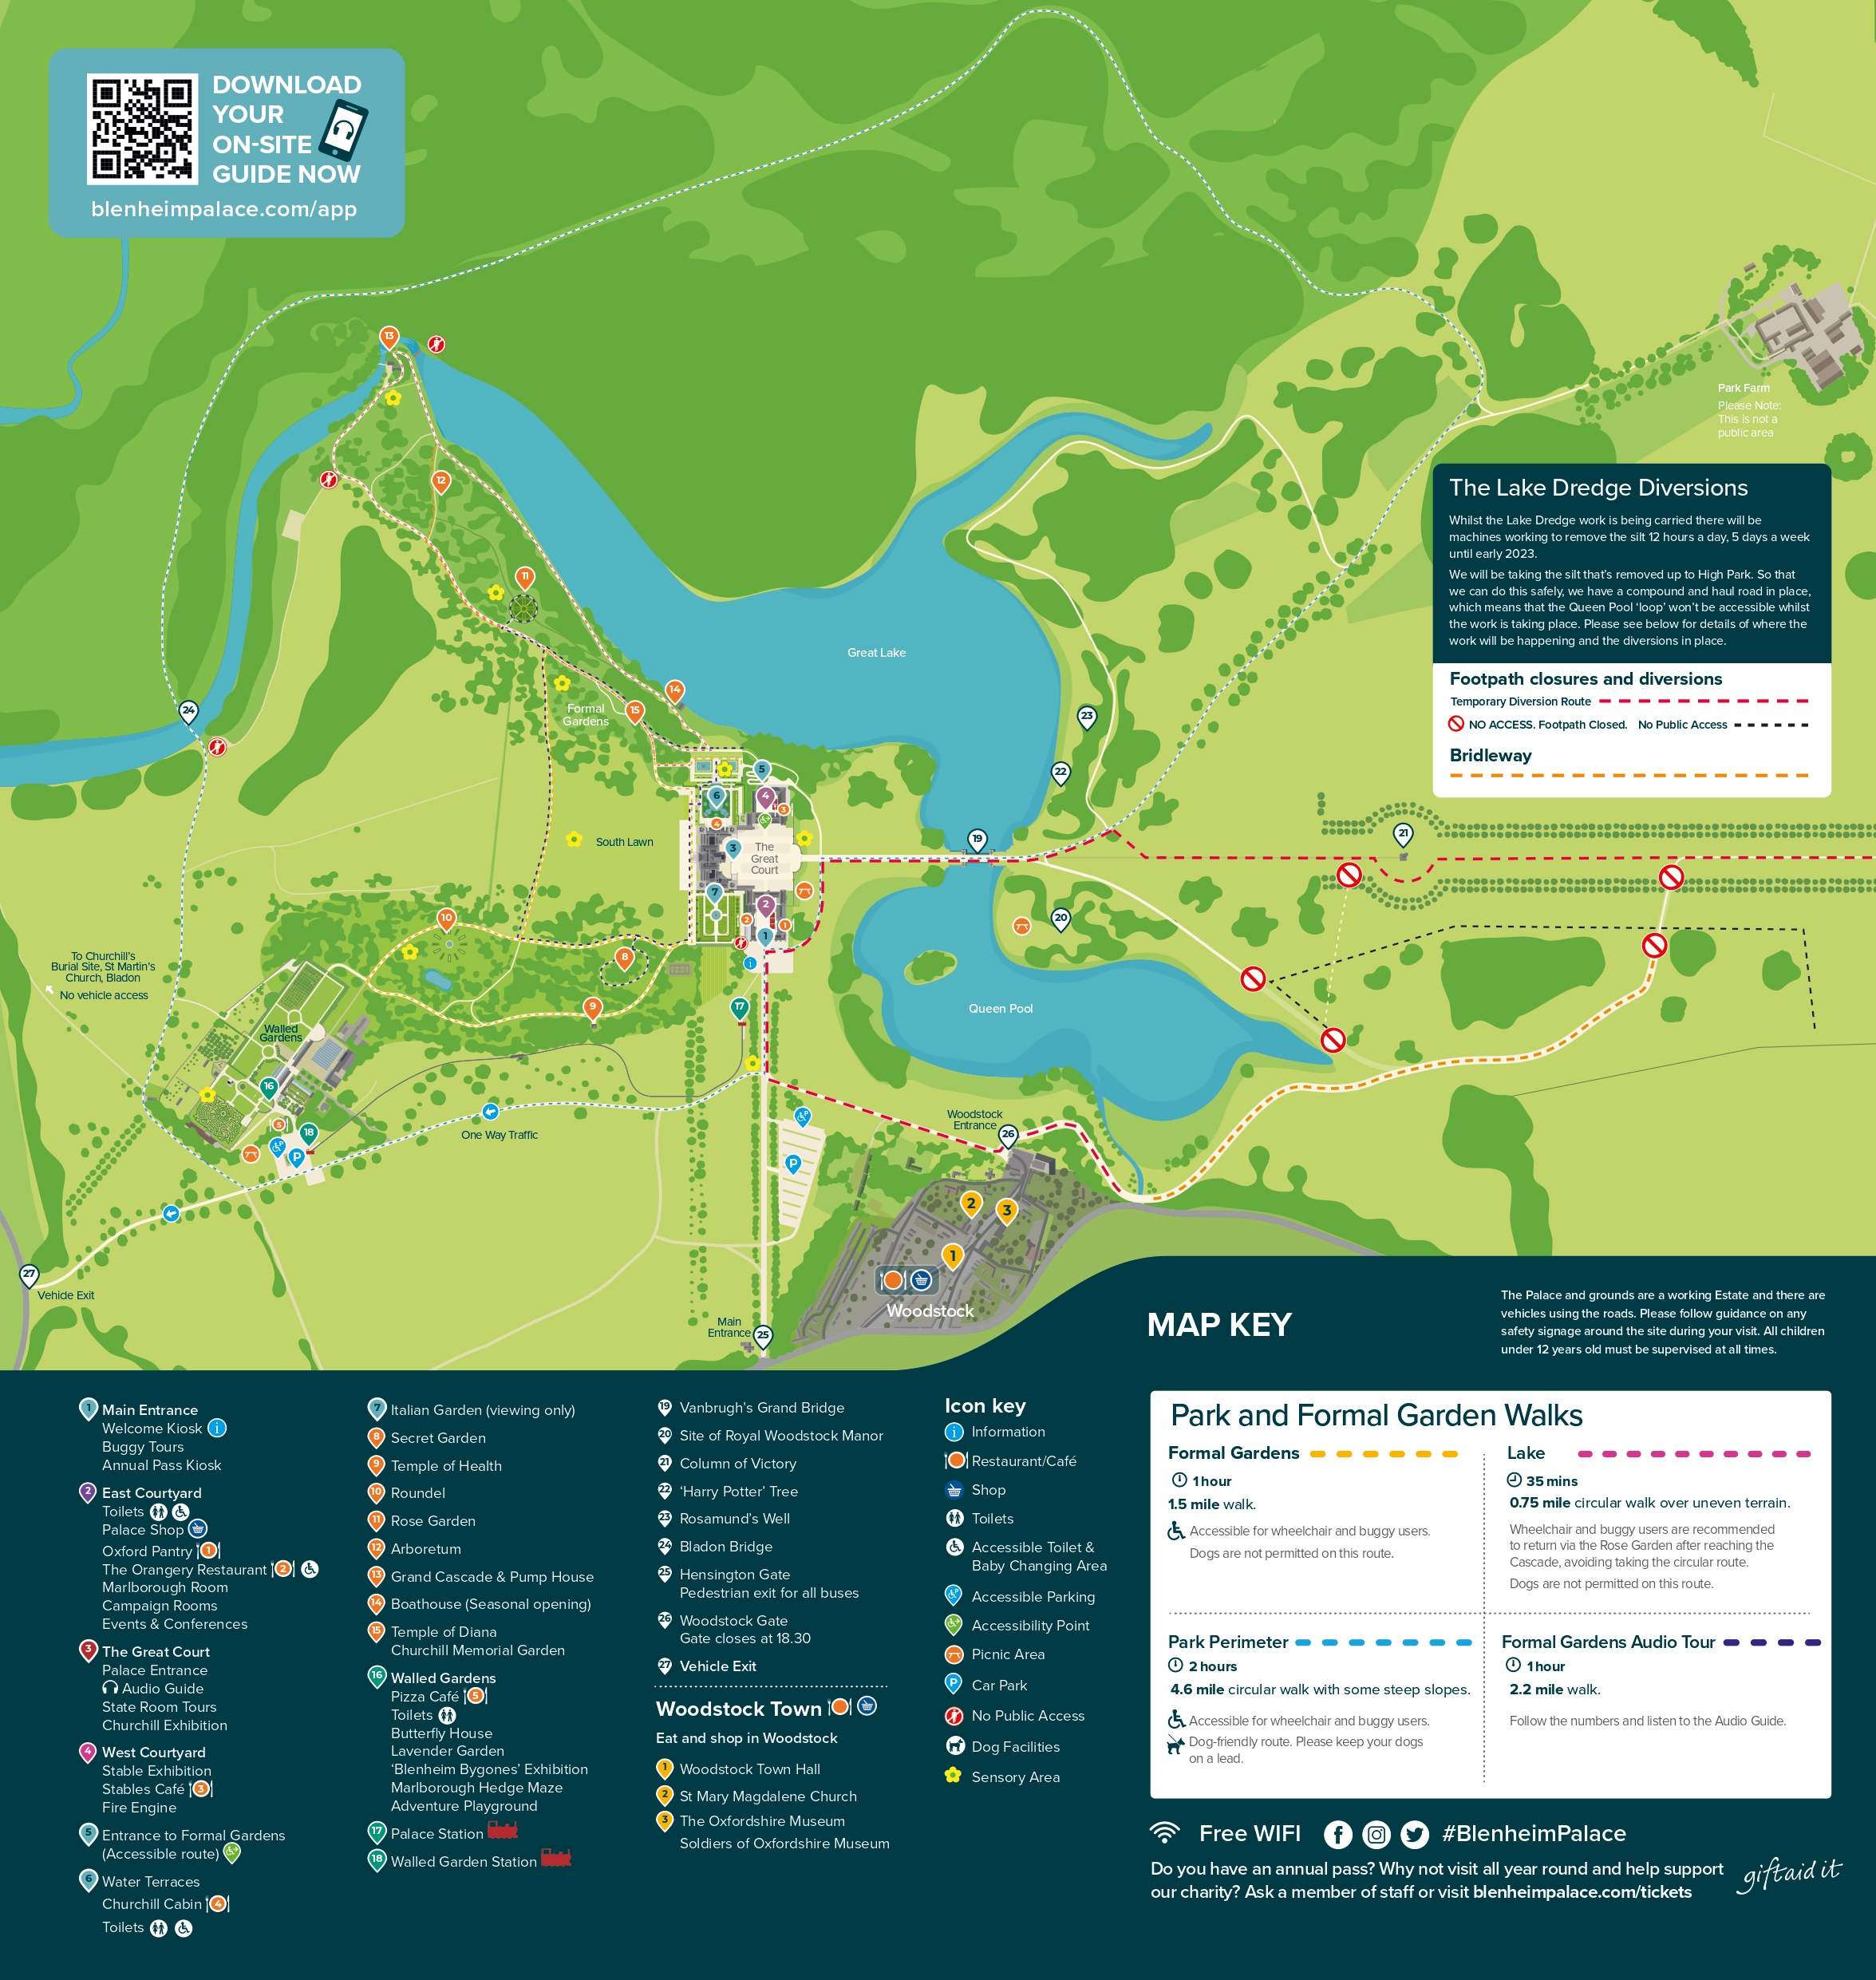 Map of Blenheim Palace and Grounds